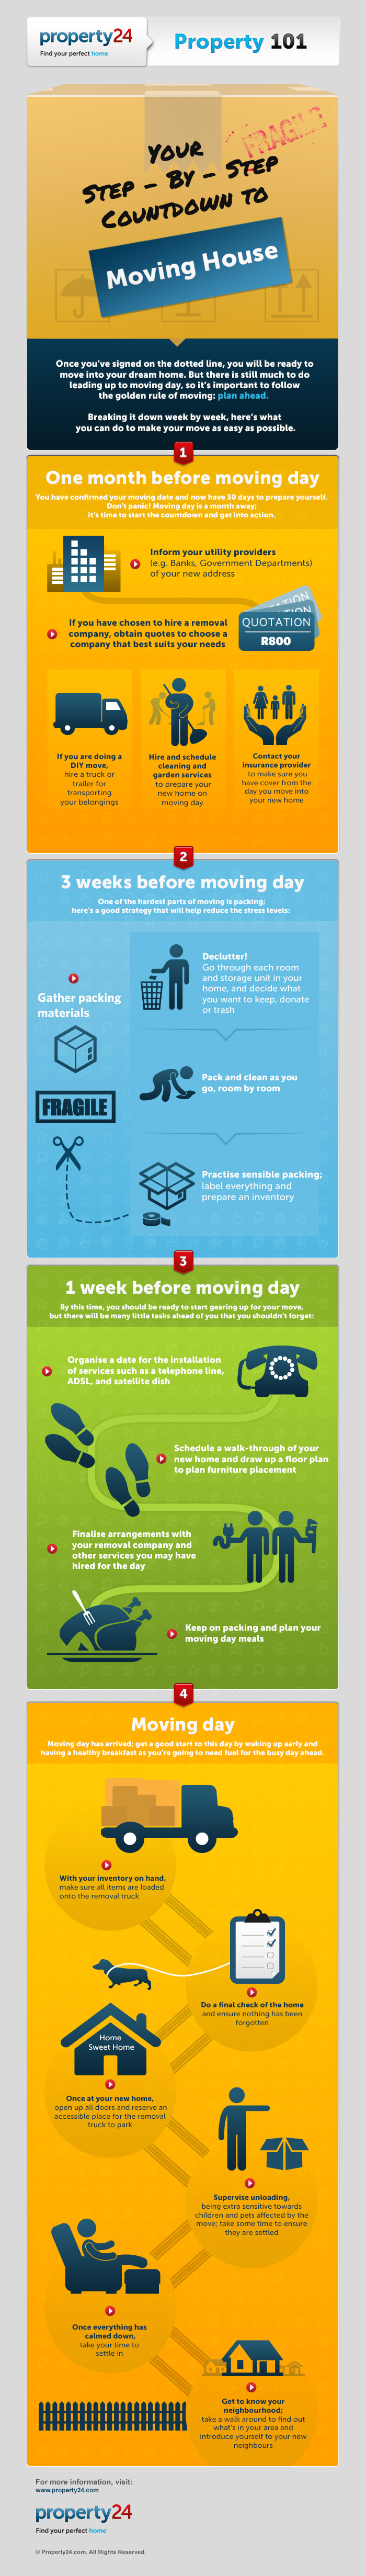 Moving home step by step [Infographic]